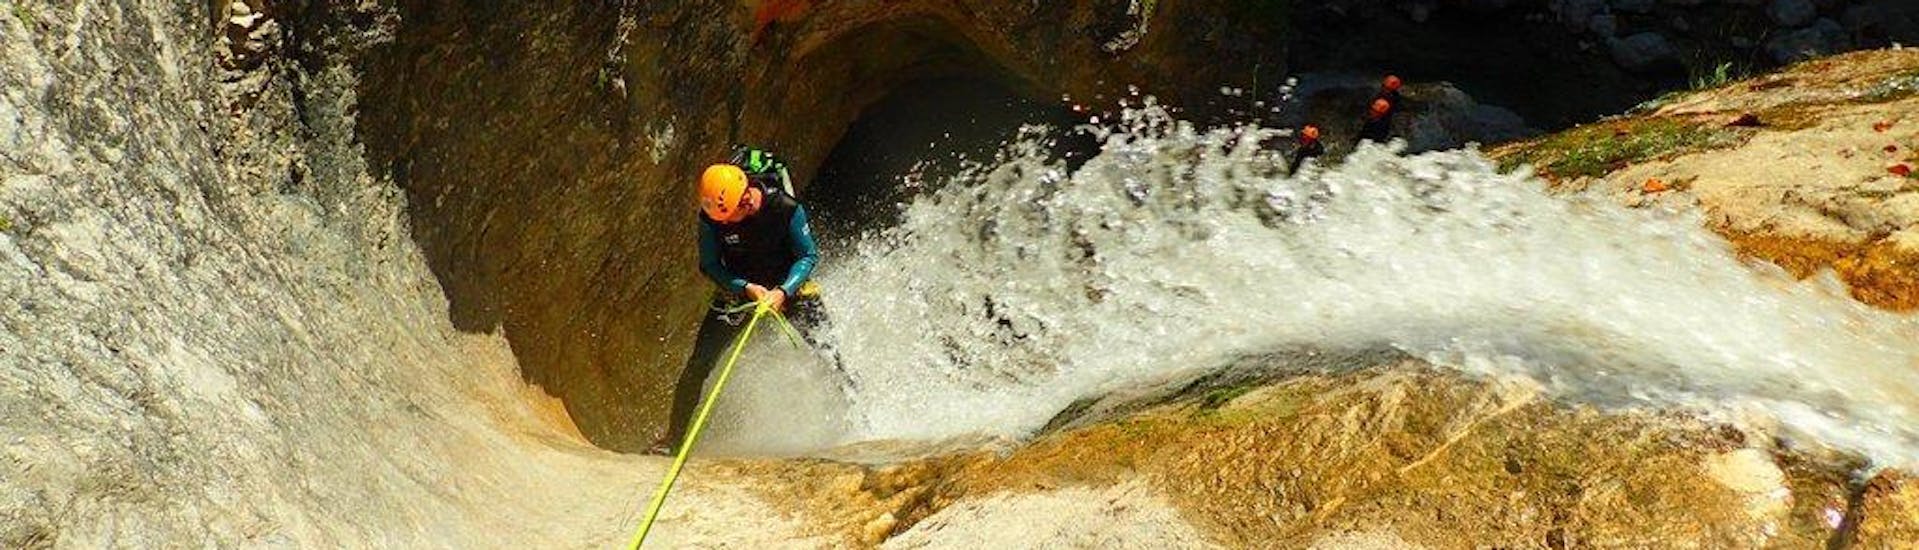 Canyoning di media difficoltà a Golling - Fischbachklamm con Torrent Outdoor Experience Golling.